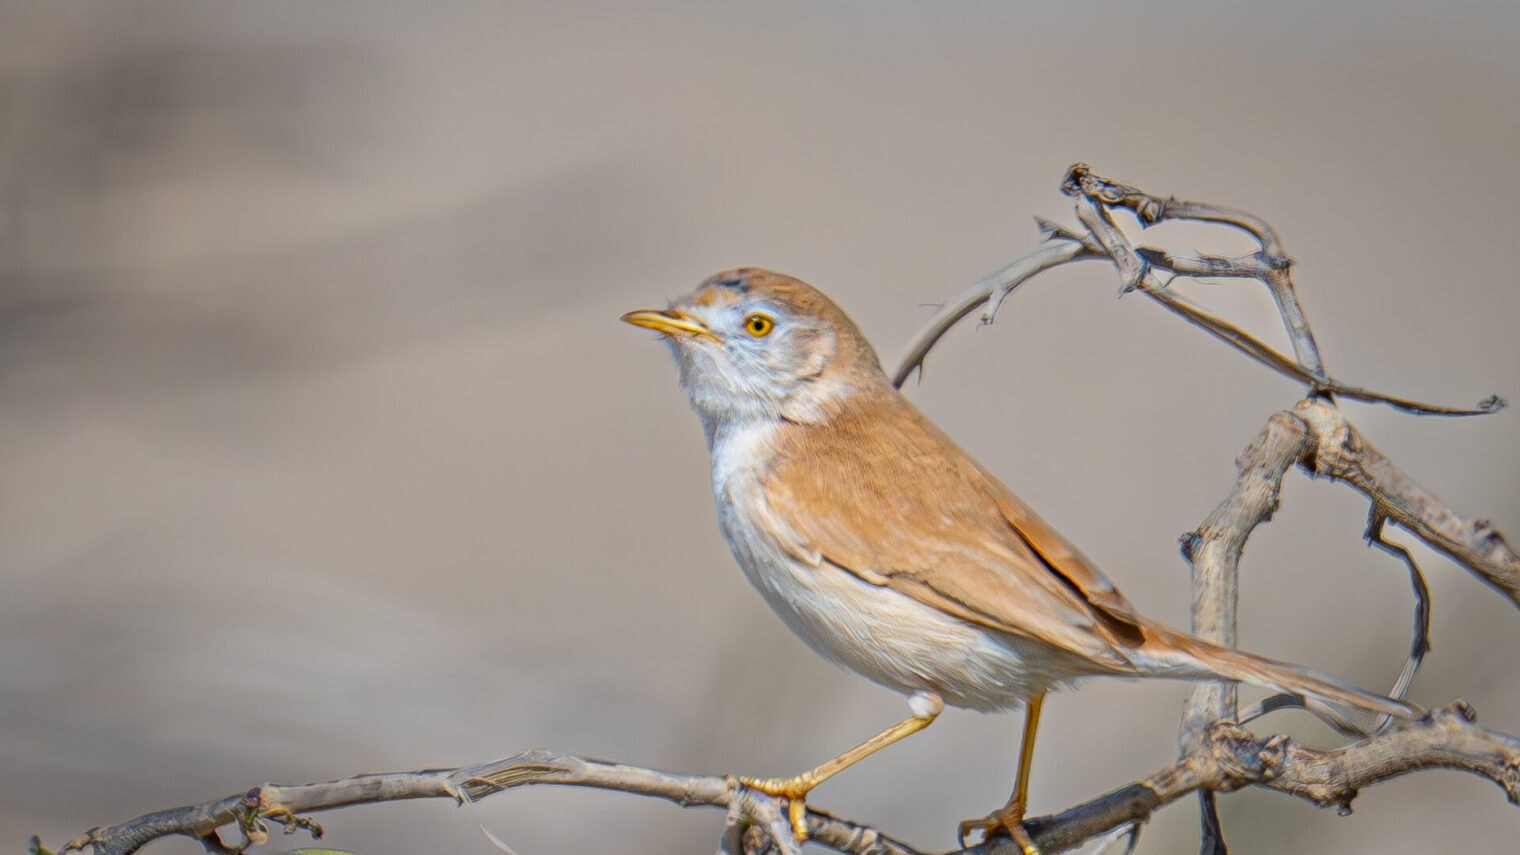 The African warbler, perched on a twig in Haifa. Photo by Oriel Levy.